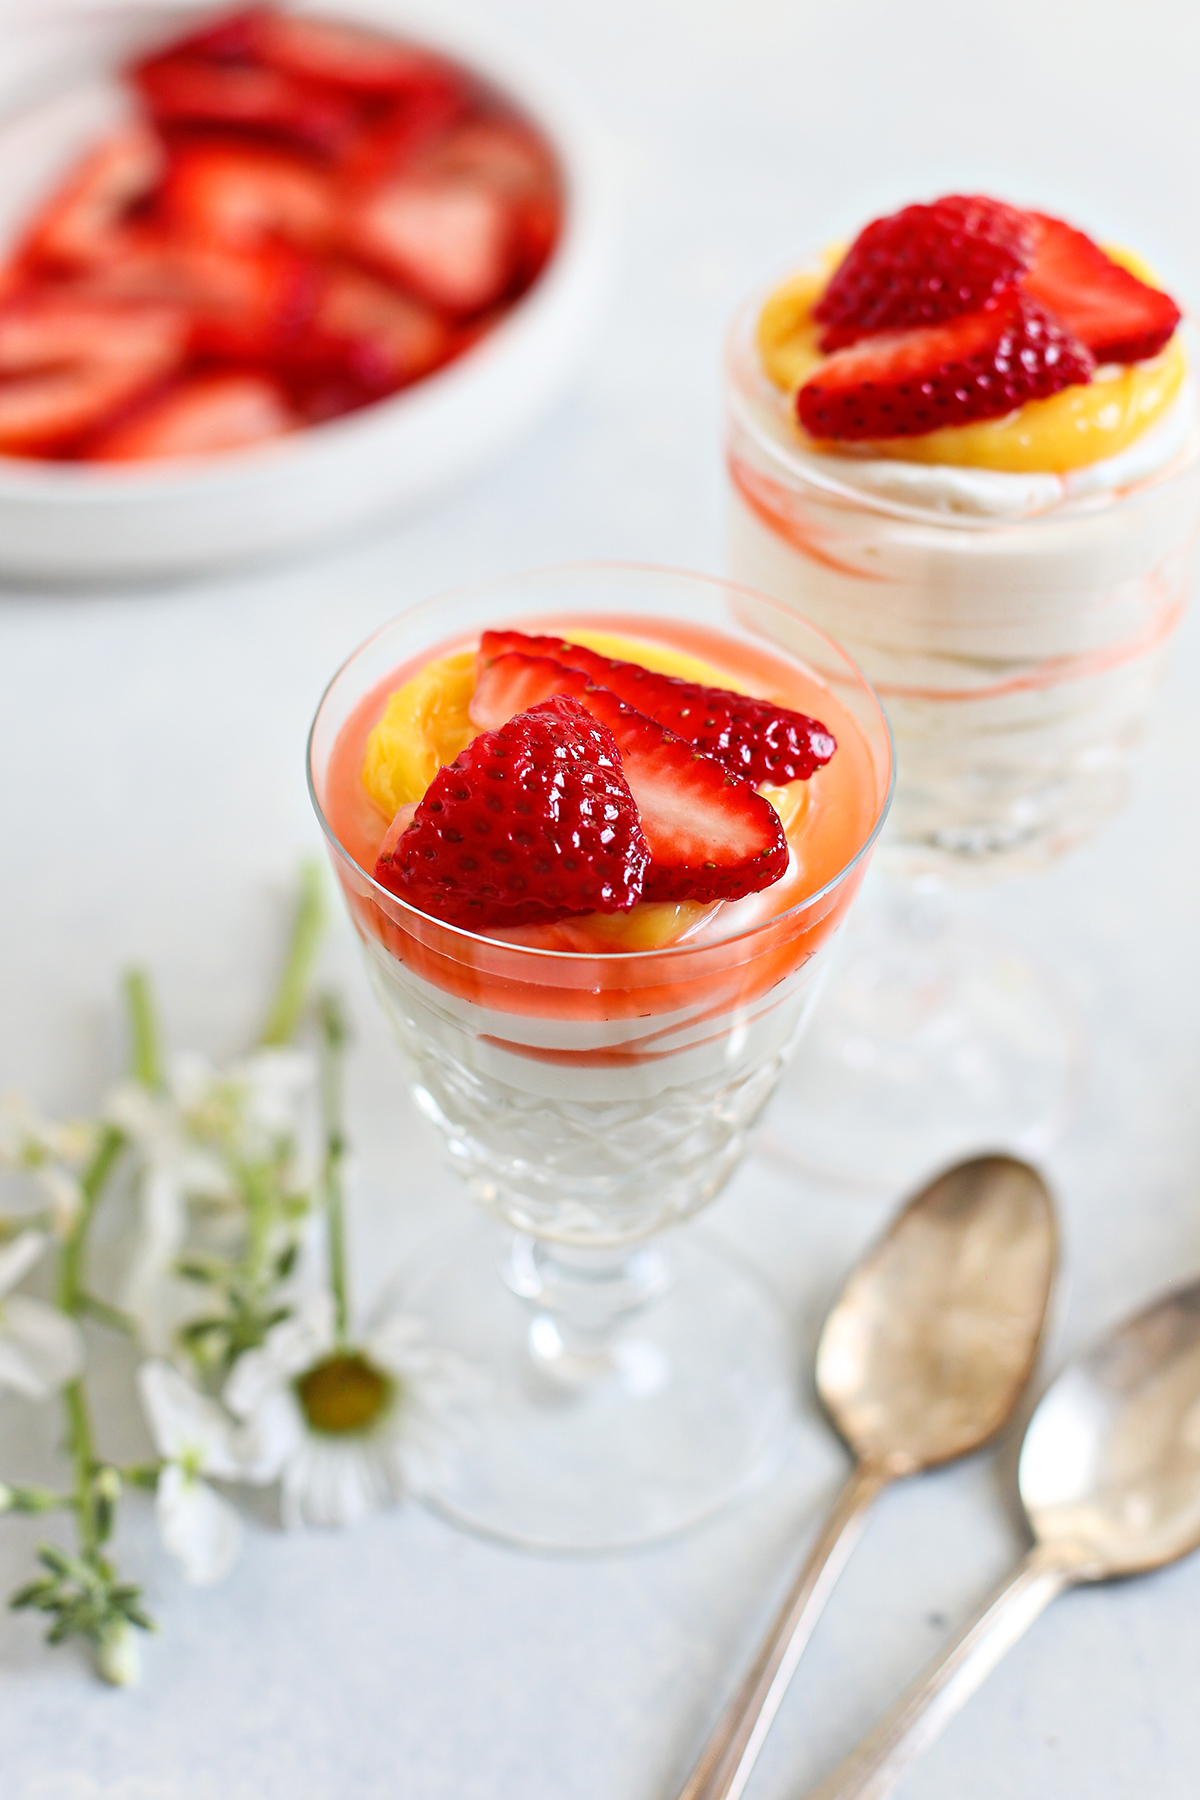 https://www.goodlifeeats.com/wp-content/uploads/2023/04/Cheesecake-Mousse-with-Strawberries-and-Lemon-Curd.jpg